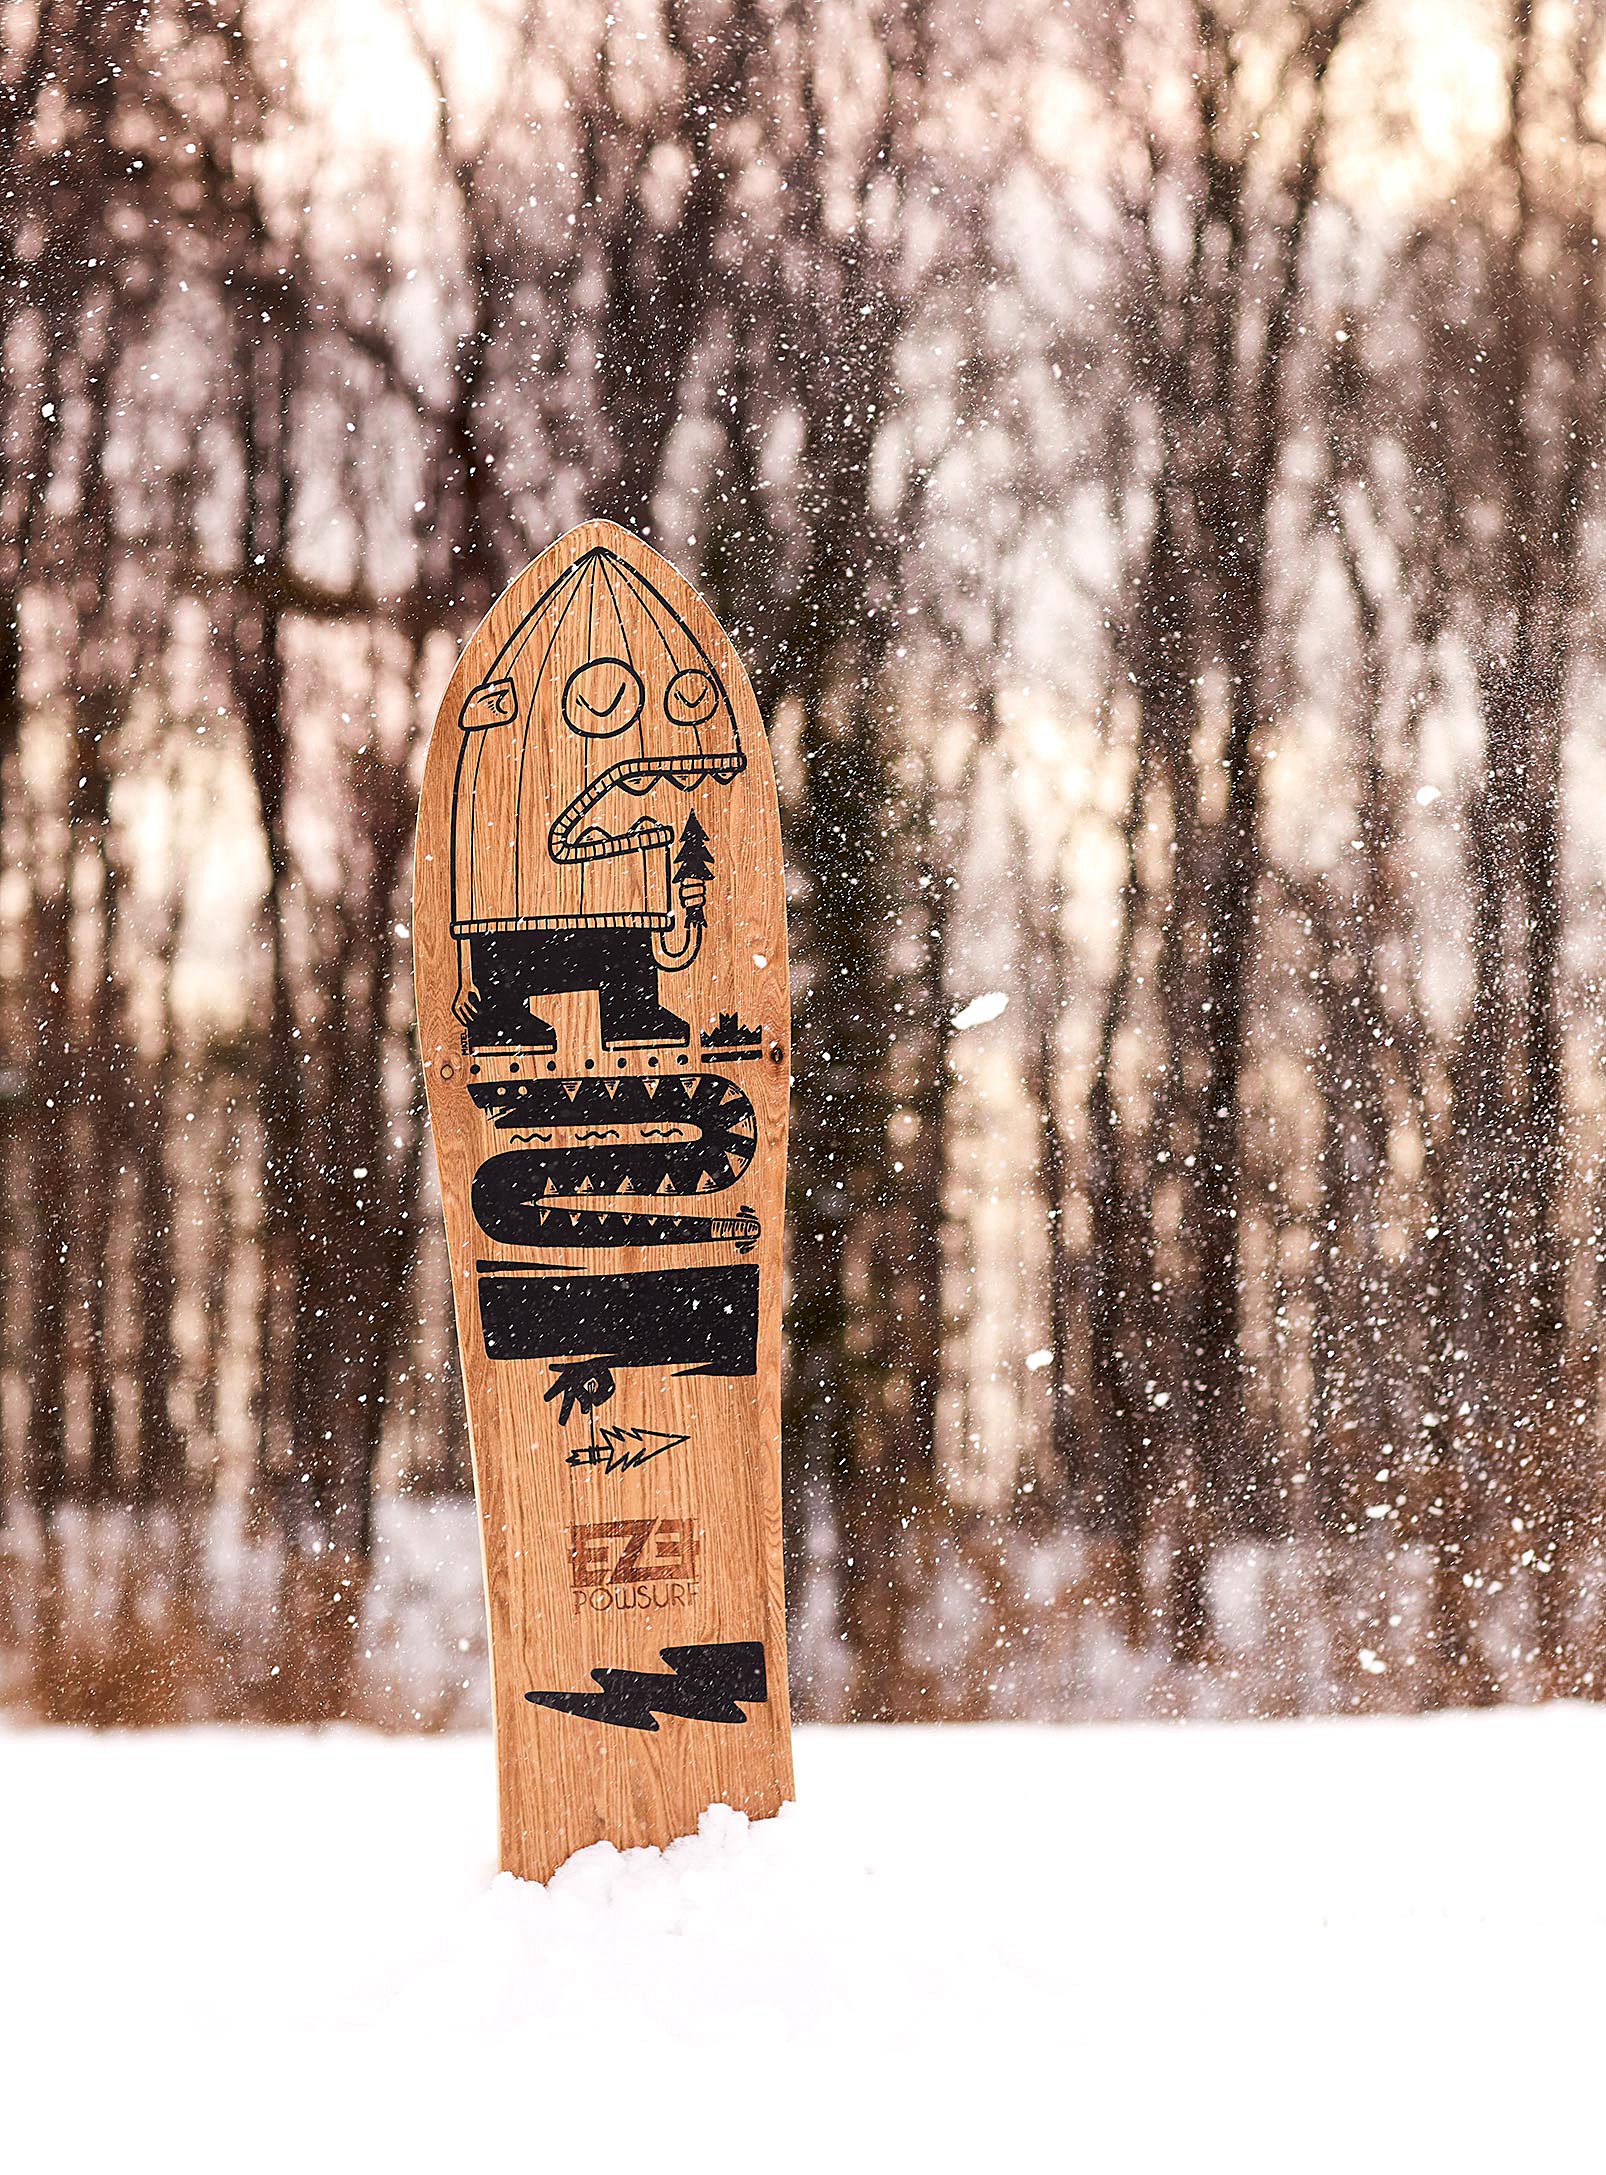 EZE Powsurf - Round Tail powsurf board In collaboration with artist Matel